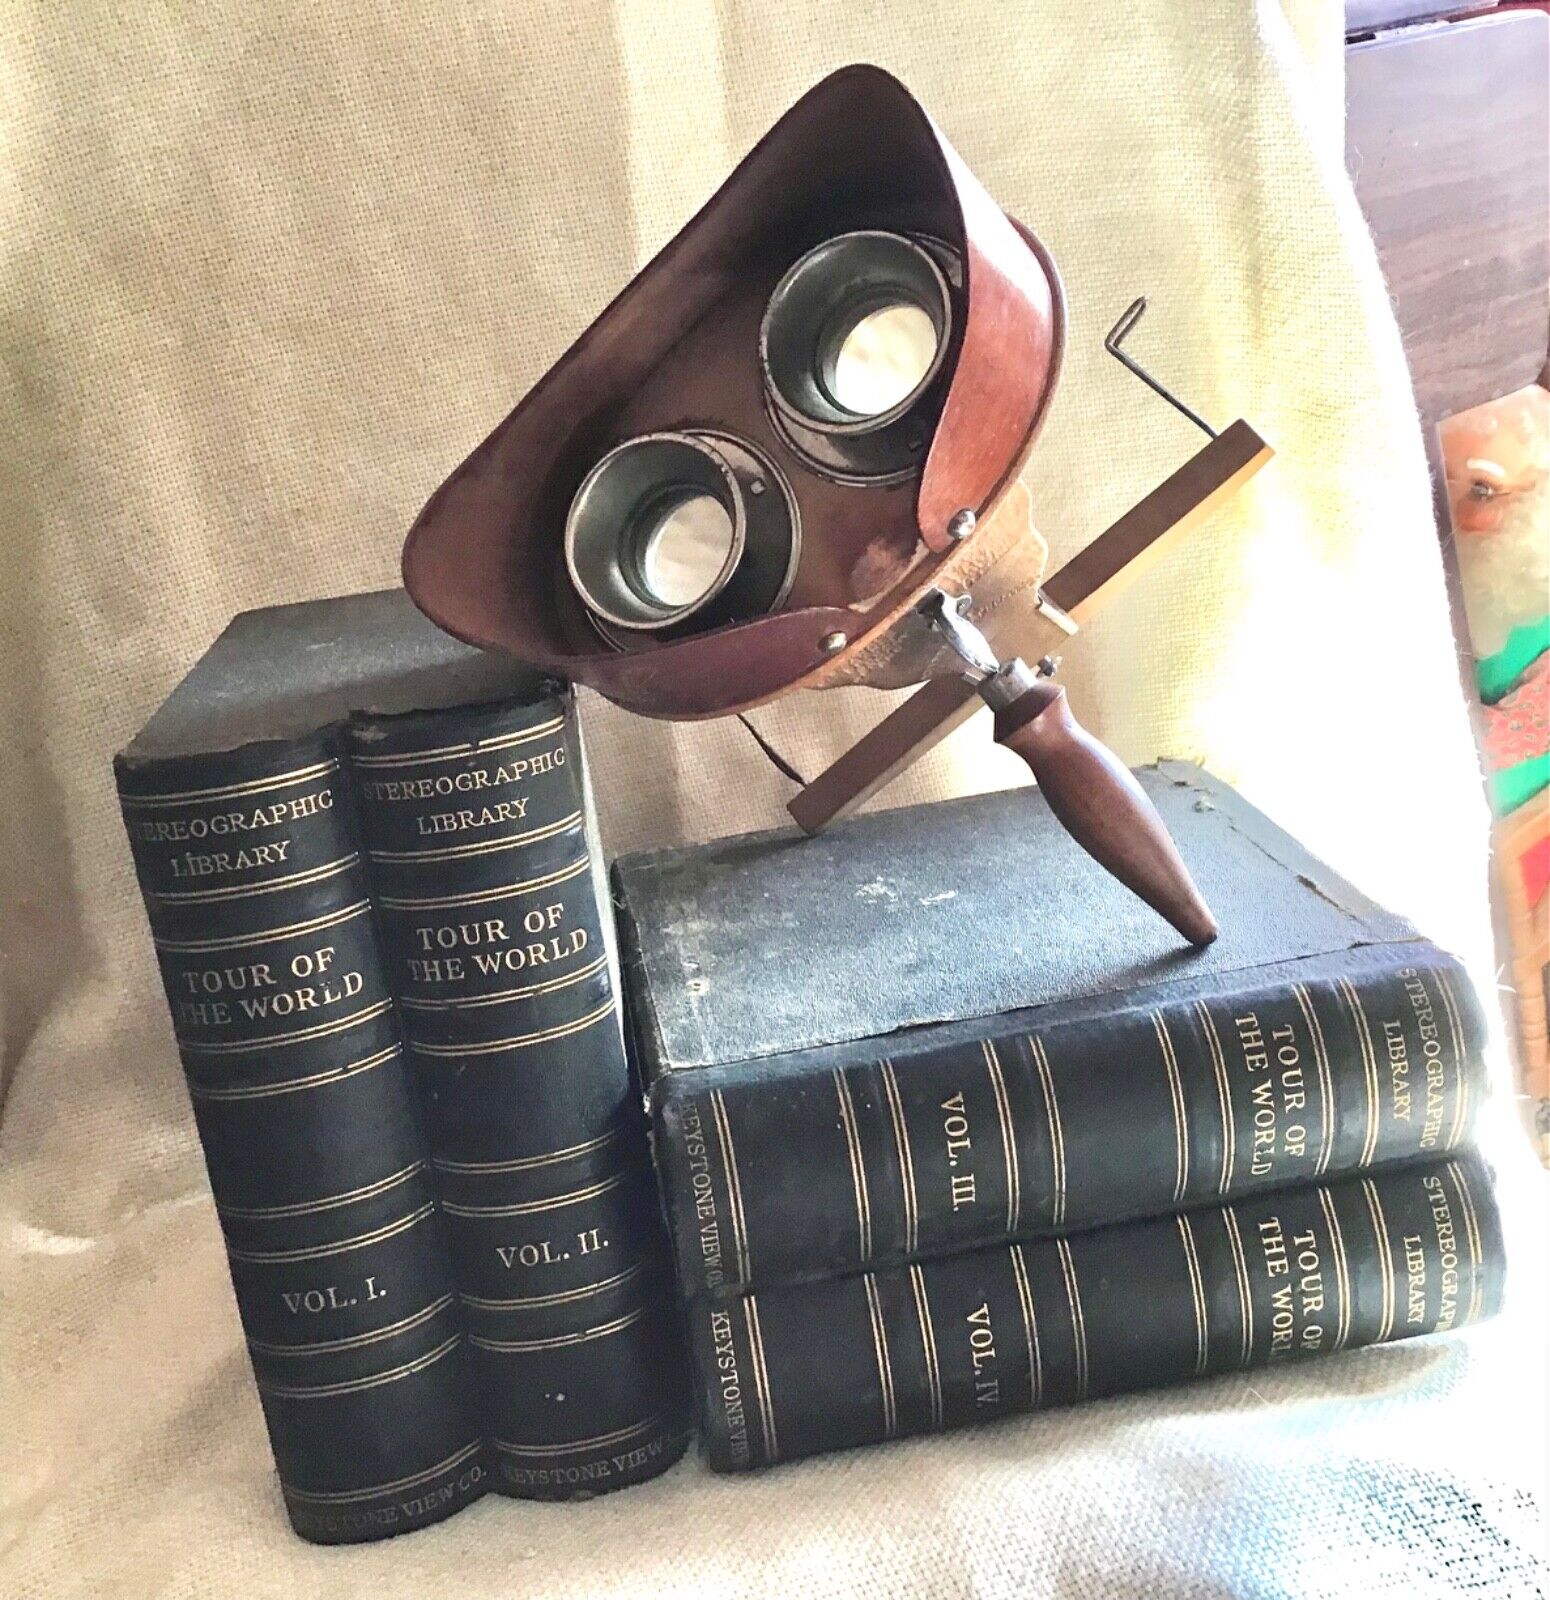 Vintage Stereo Graphoscope with Graphic Library Vol I - IV (Tour of World)